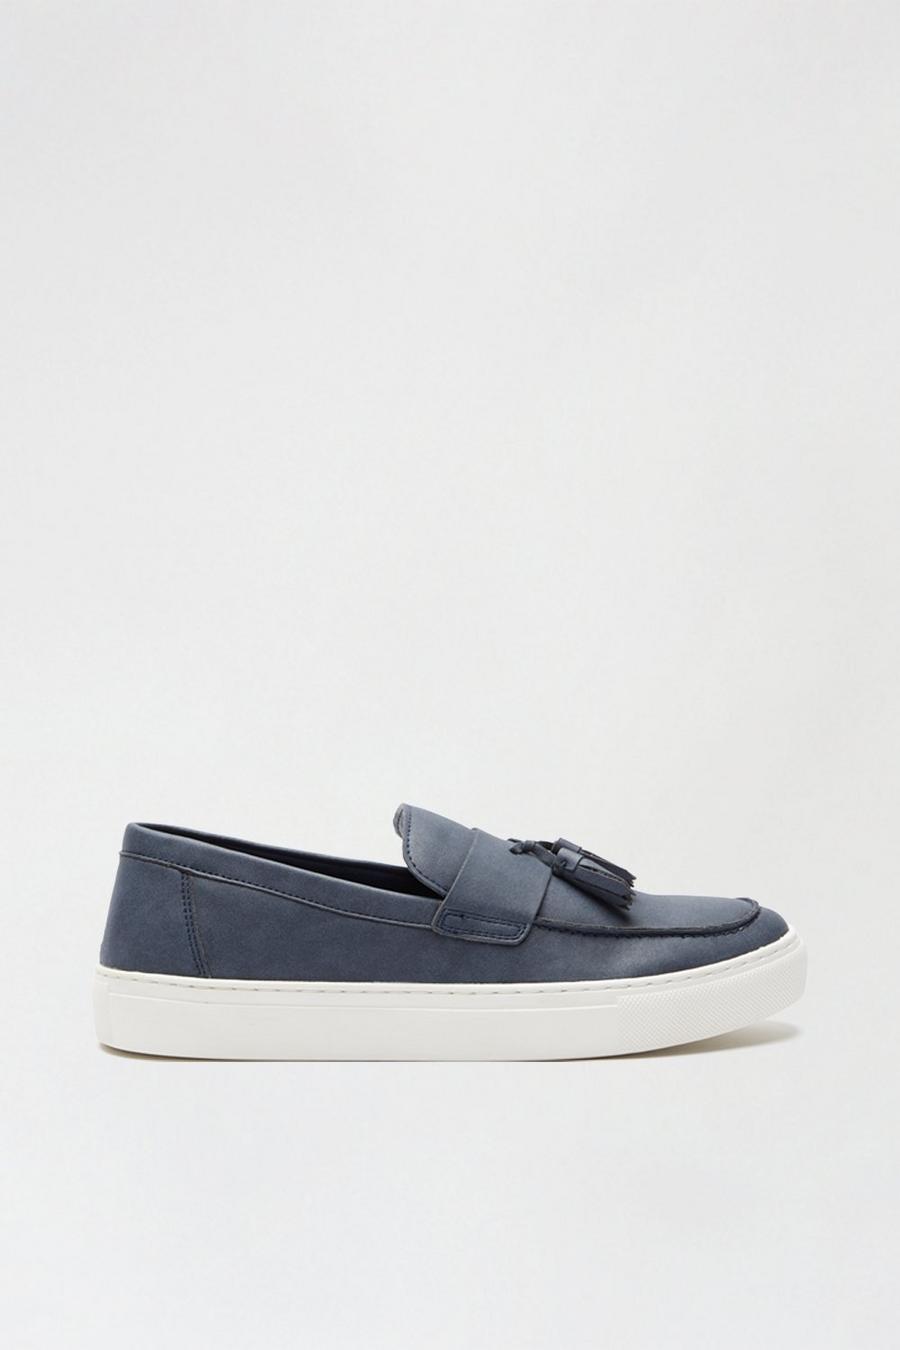 Suede Look Slip On Shoes With Tassle